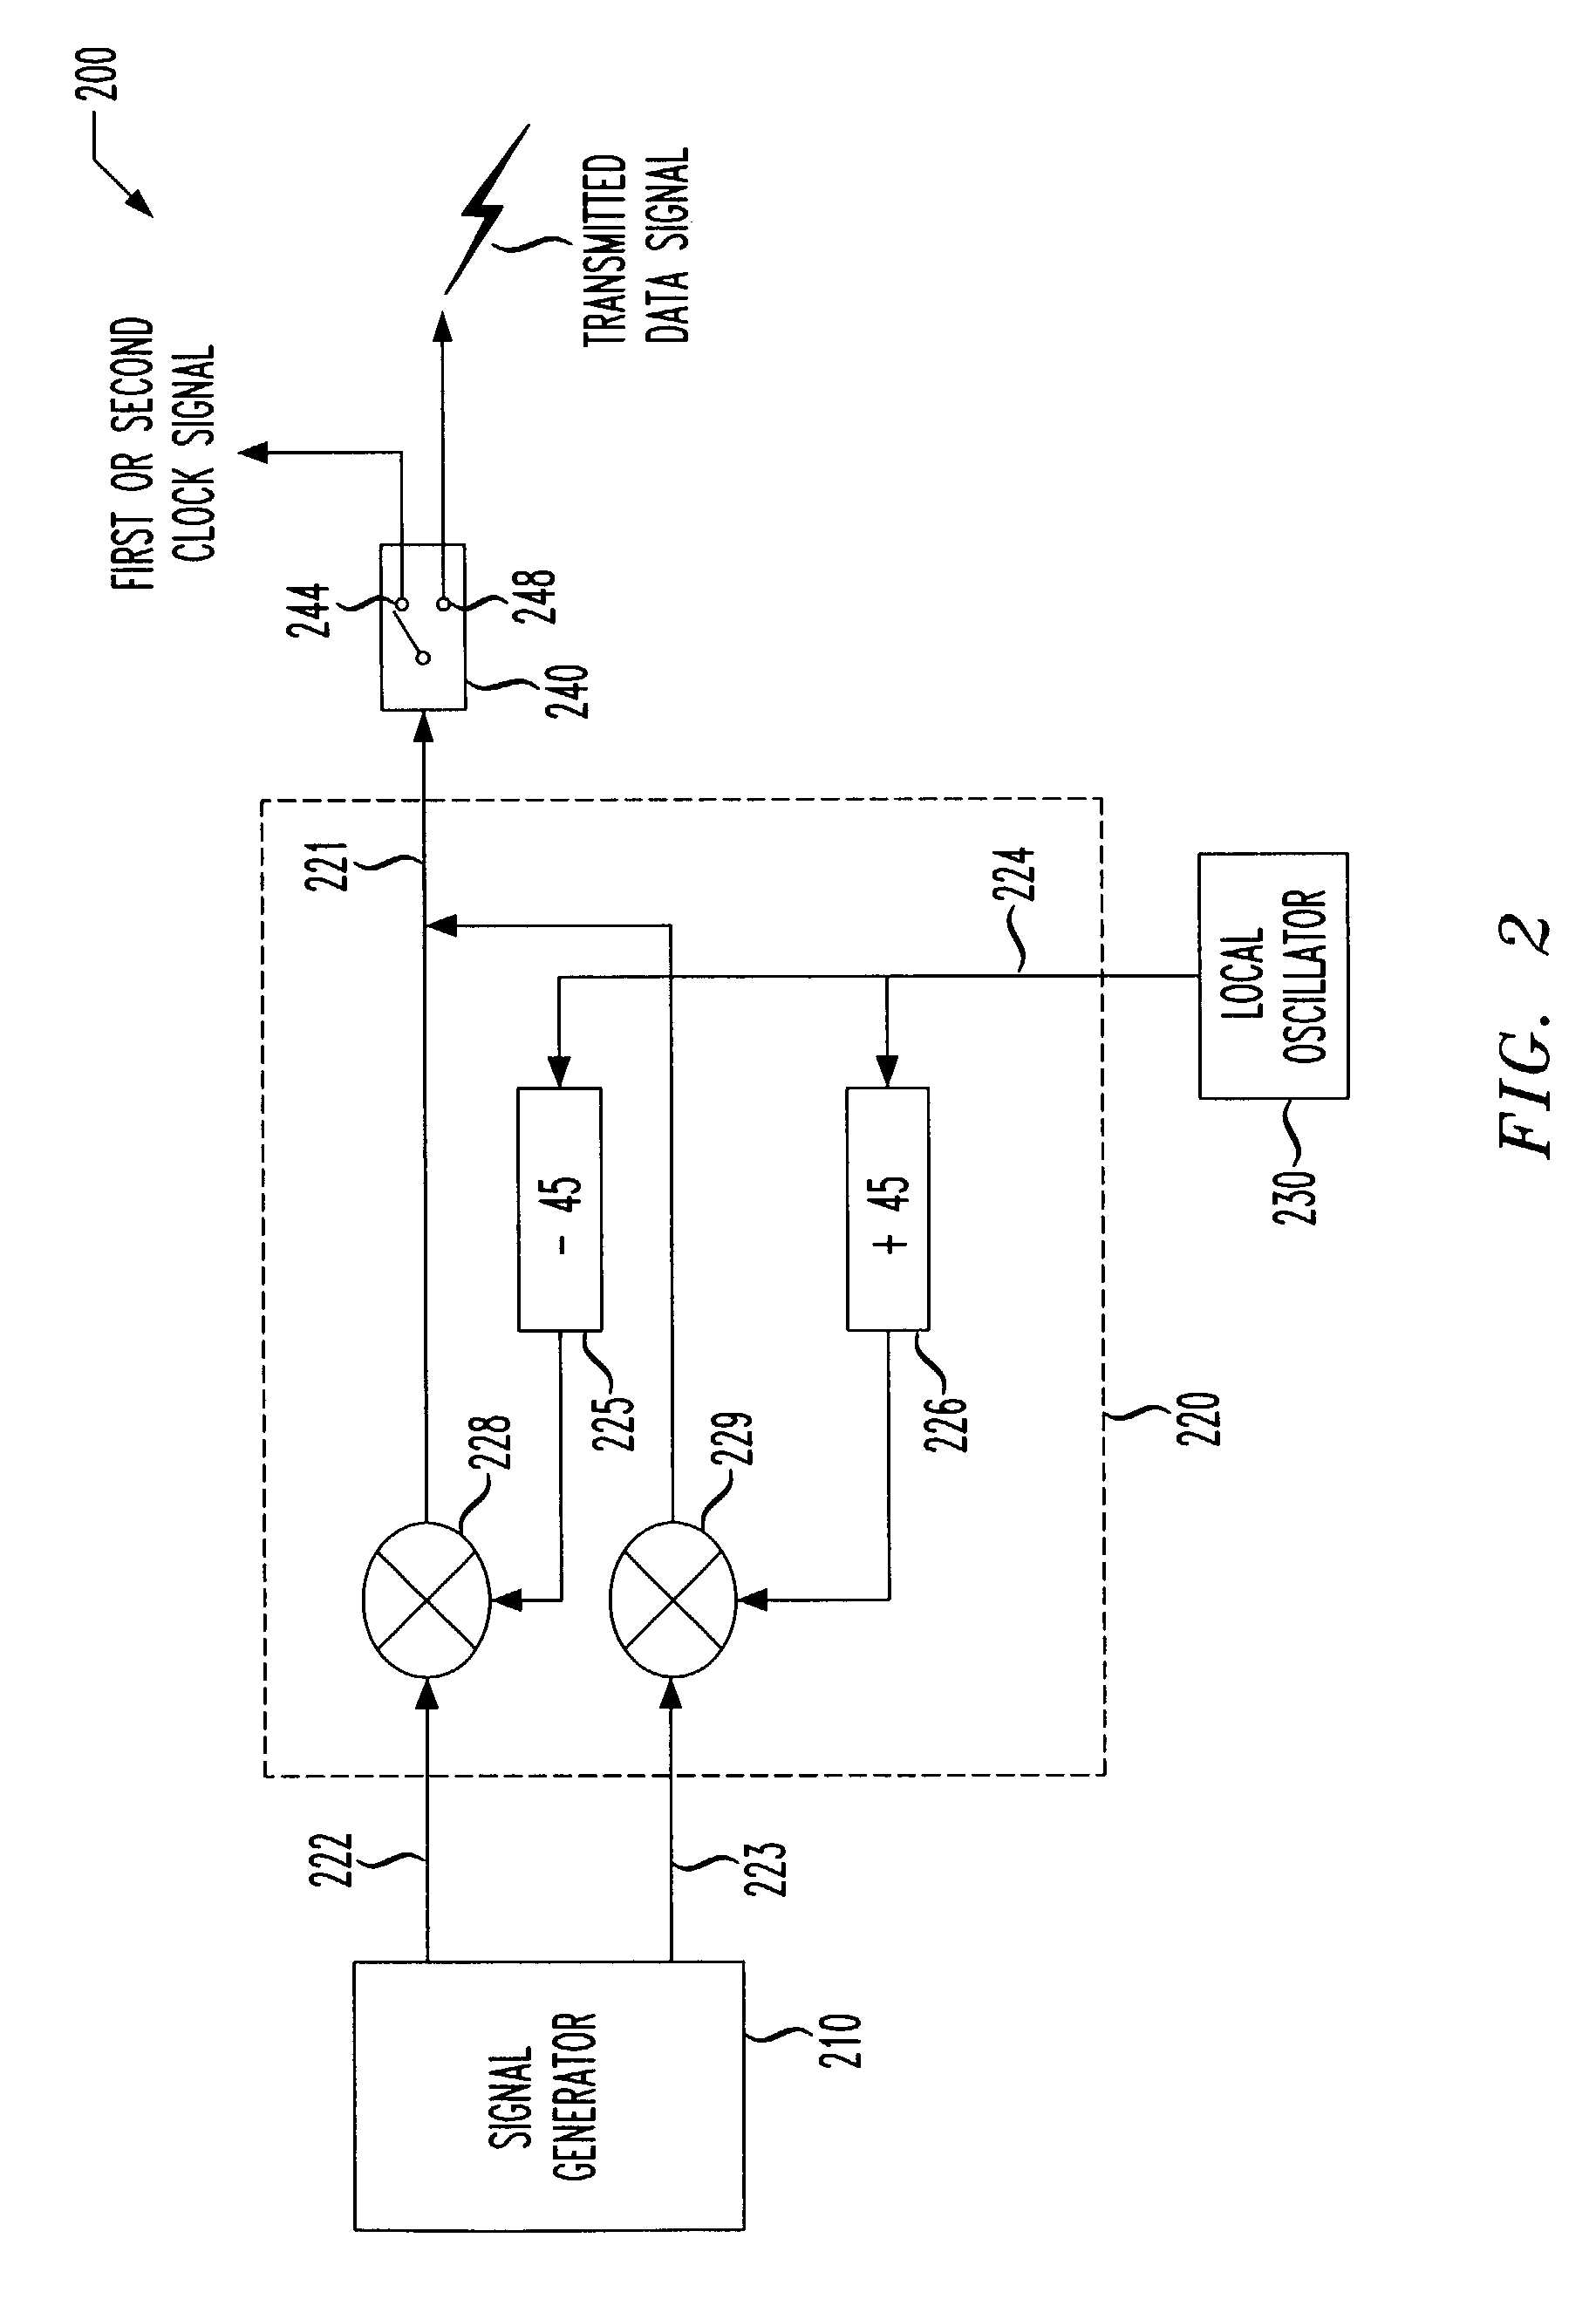 Orthogonal frequency division multiplexing transceiver and method of operating the same